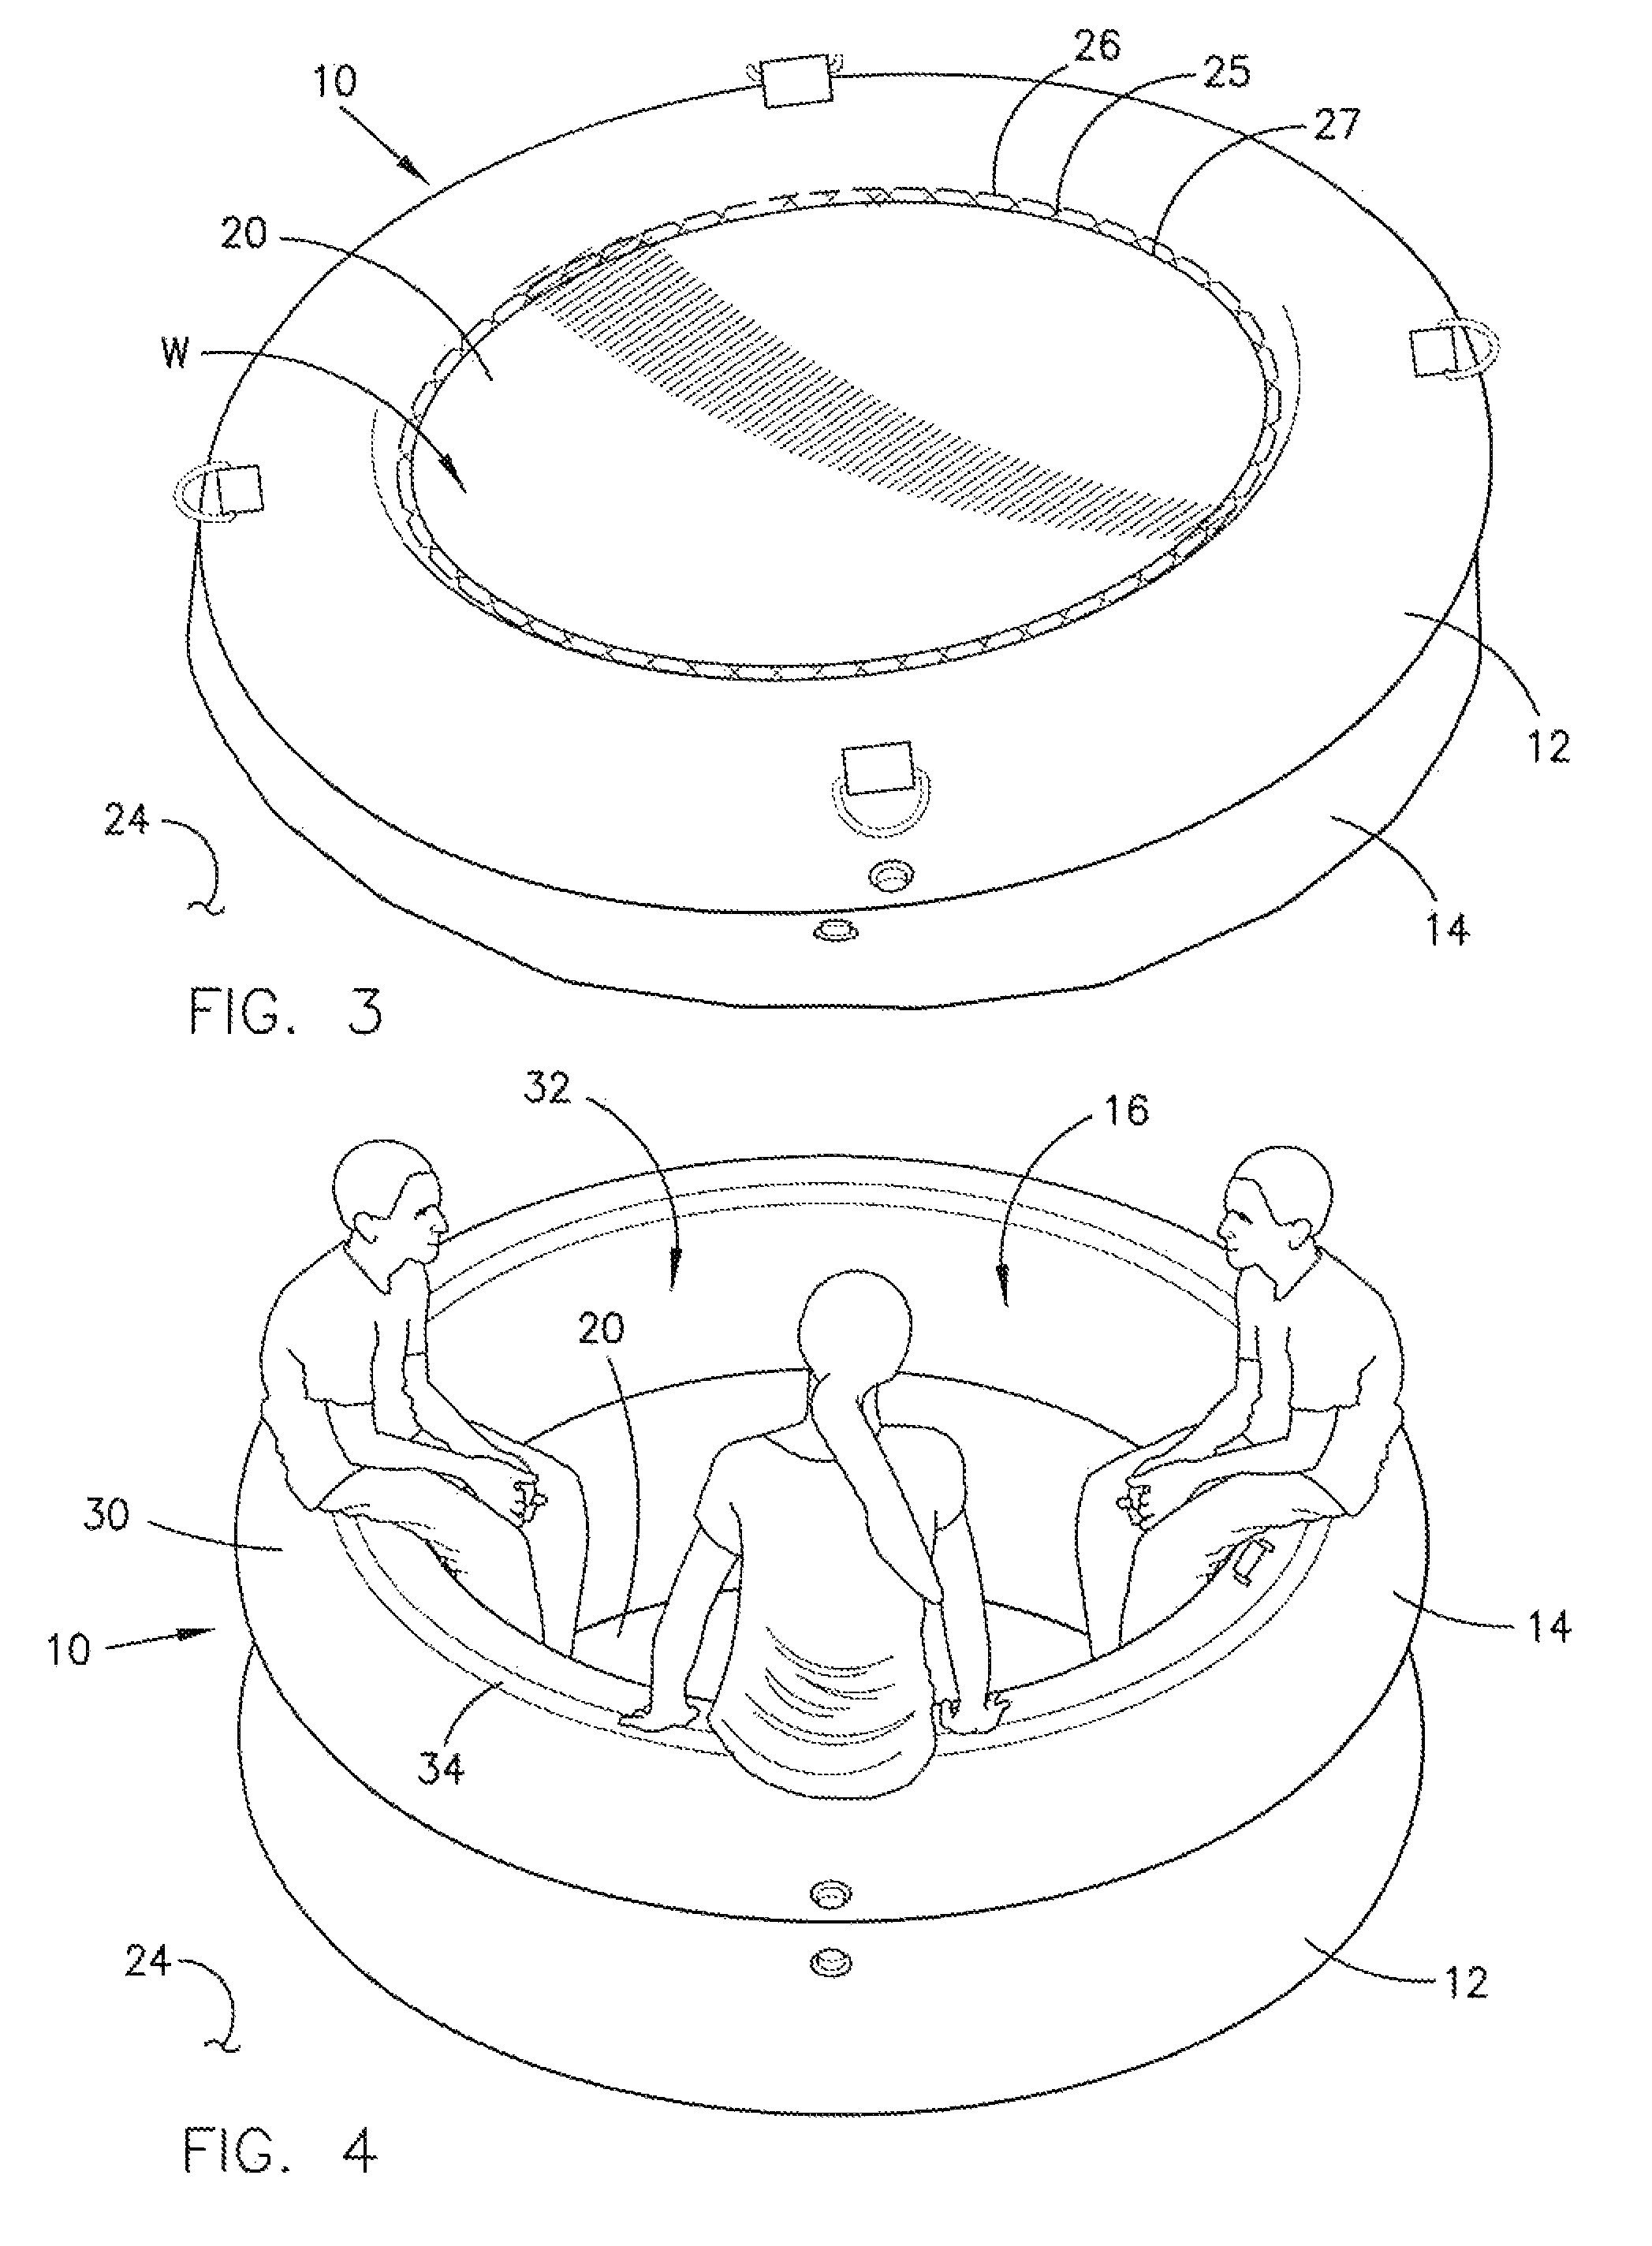 Inflatable recreation device